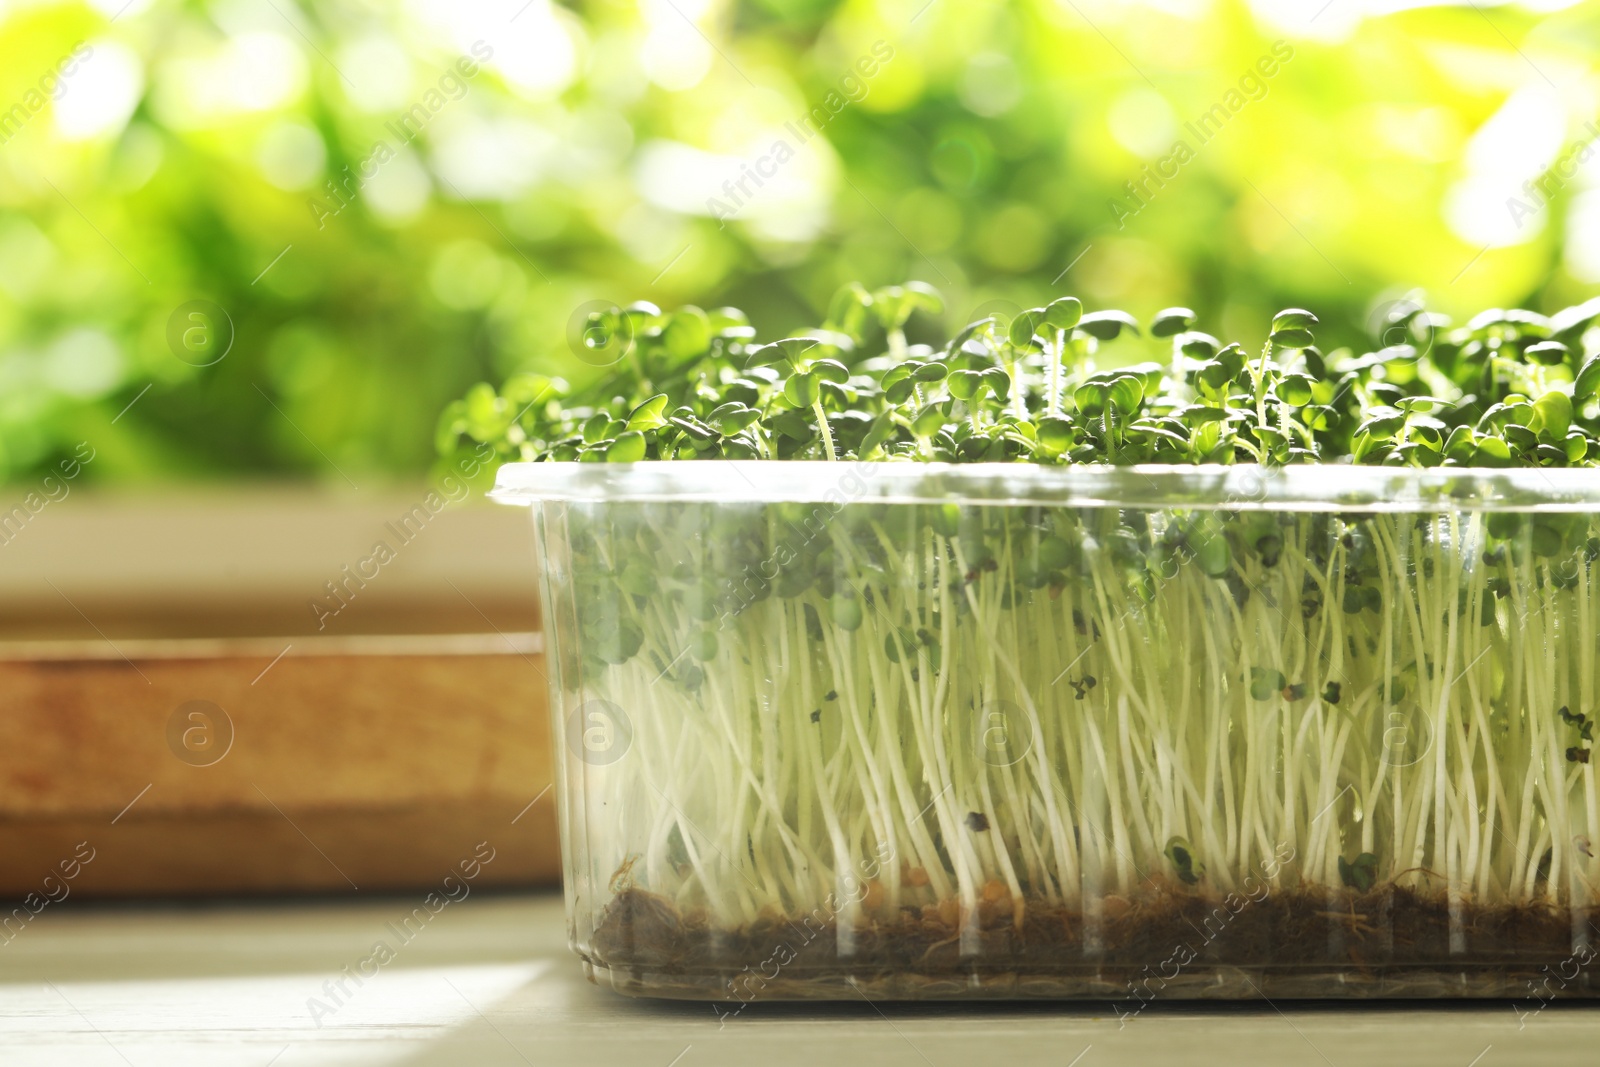 Photo of Sprouted arugula seeds in plastic container on wooden table, closeup